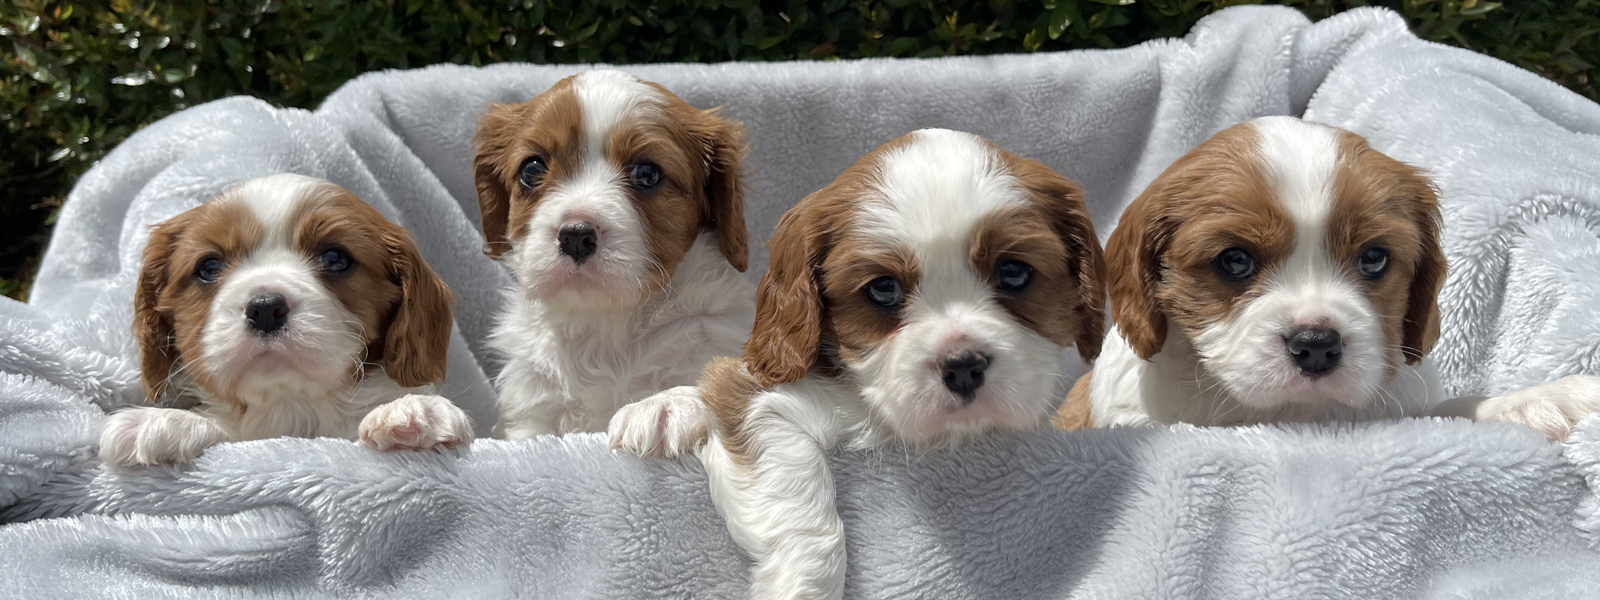 Cavalier King Charles Spaniel Puppies for Sale Victoria